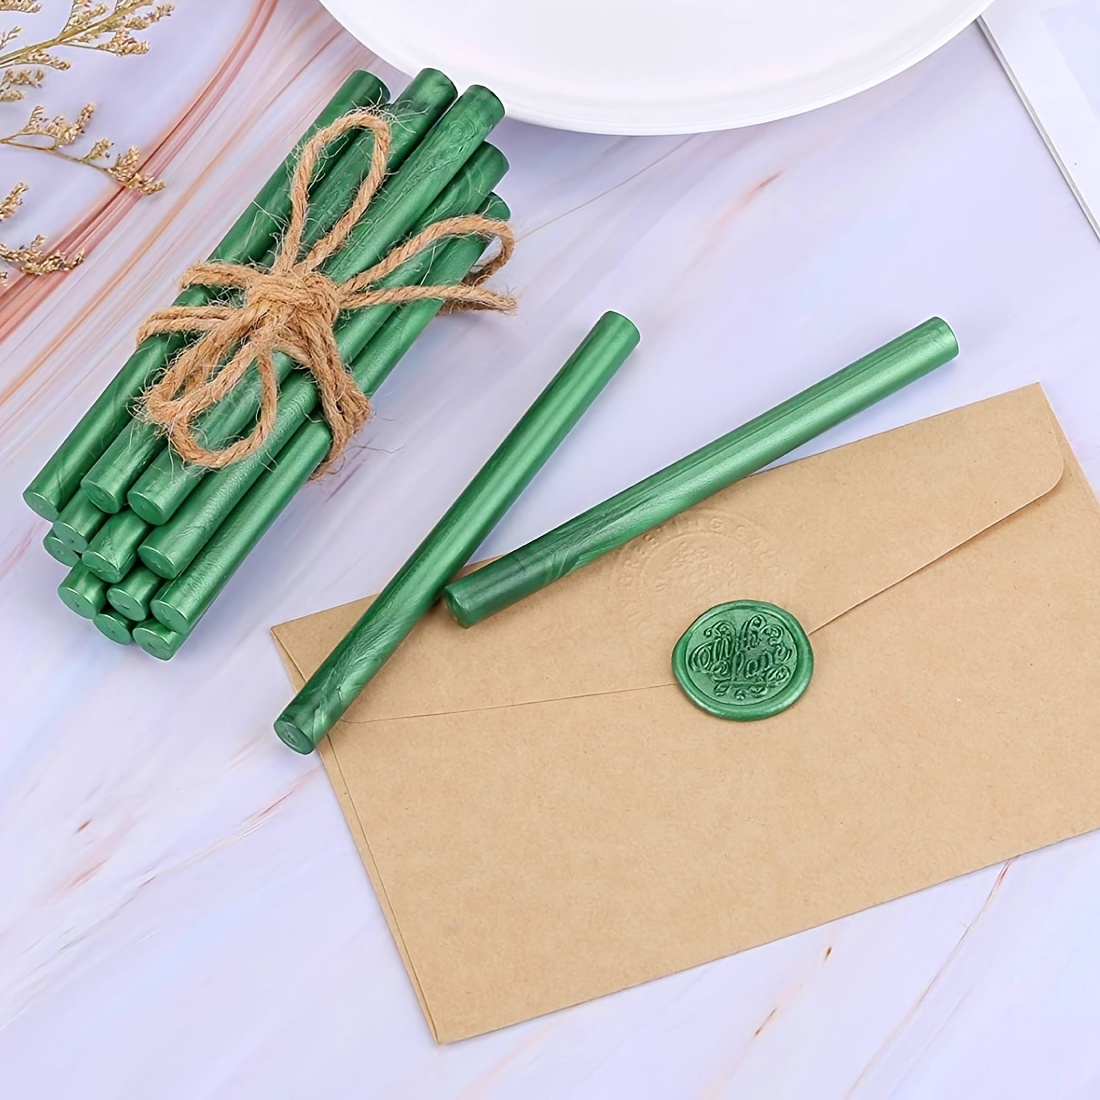  Wax Seal Kits, Wasole 20Pcs Pine Green Sealing Wax Sticks with  1 Pieces Glue Gun Set for Wax Seal Stamp, Great for Wedding Invitations,  Birthday Cards, Envelopes, Gift Wrapping (Pine Green) 